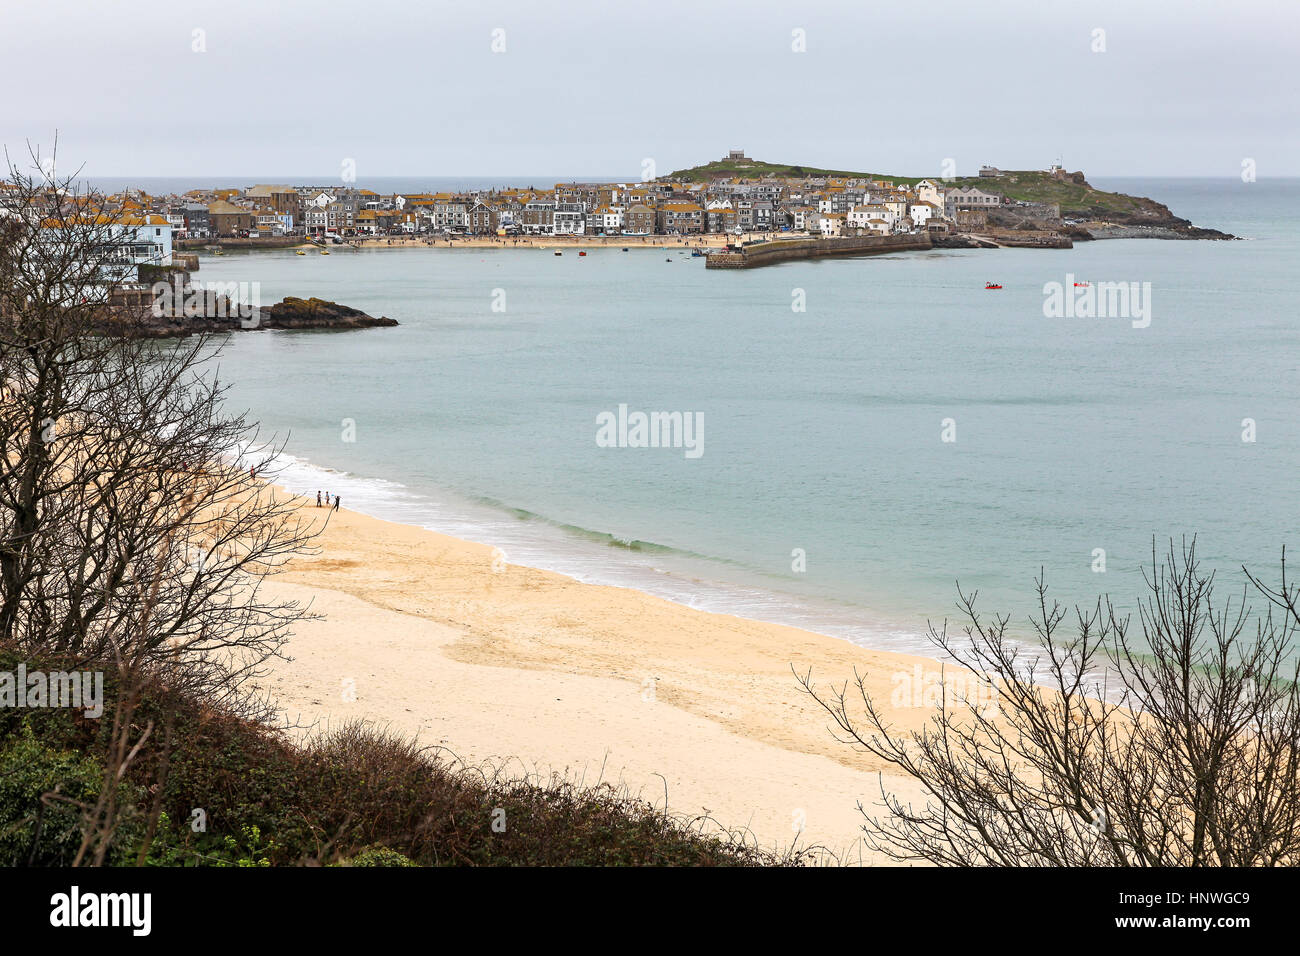 A view towards St. Ives from Carbis Bay, Cornwall, England, UK Stock Photo